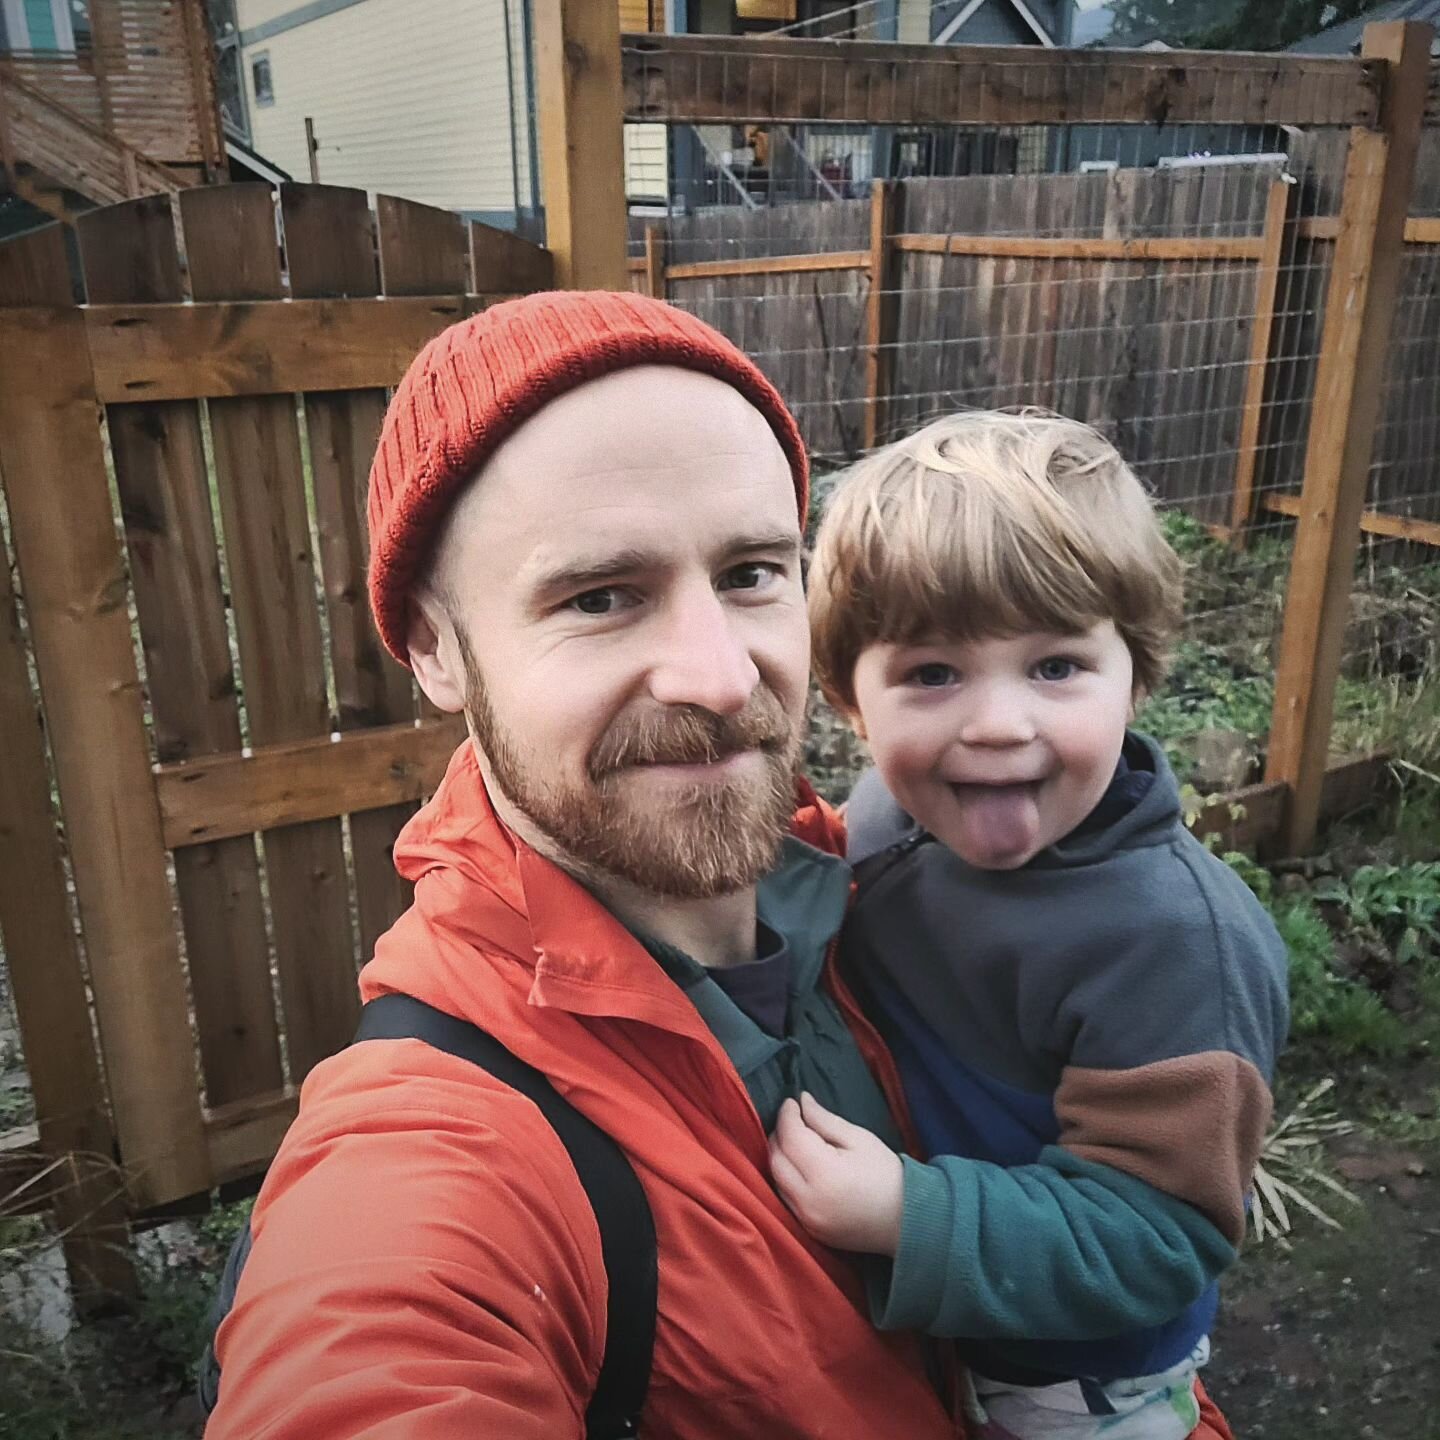 Decided to carry the not so little man to daycare today. It's about 1km. Half in right arm half in the left.

It's not a particularly difficult challenge but its a good reminder its far better to find ways to move throughout the day and choose a litt